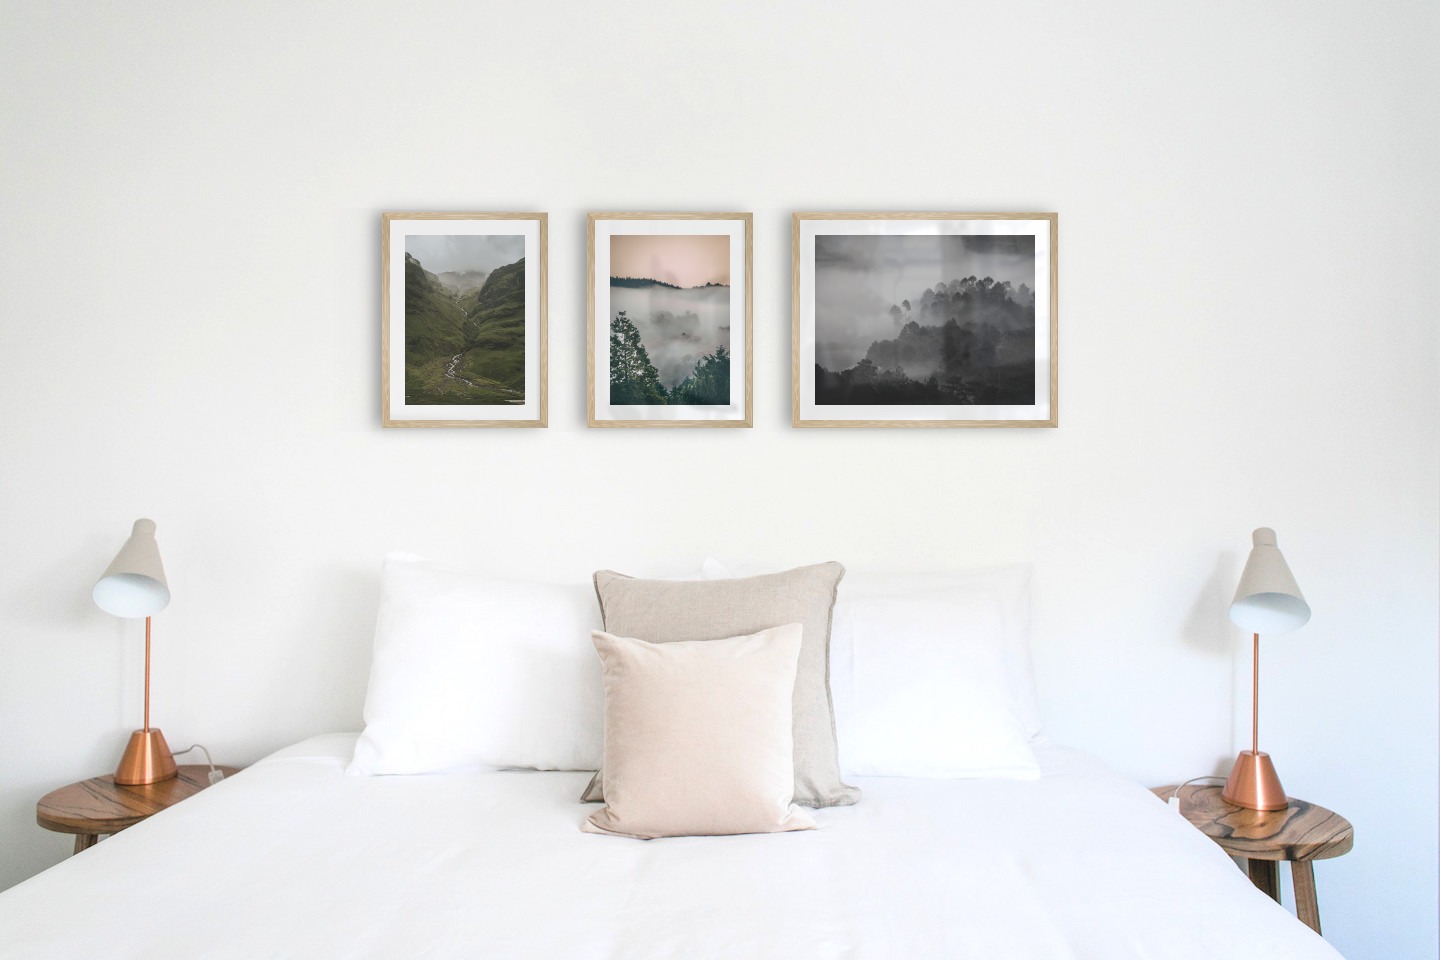 Gallery wall with picture frames in wood in sizes 30x40 and 40x50 with prints "Stream in valley", "Wooden tops and orange sky" and "Foggy wooden tops"